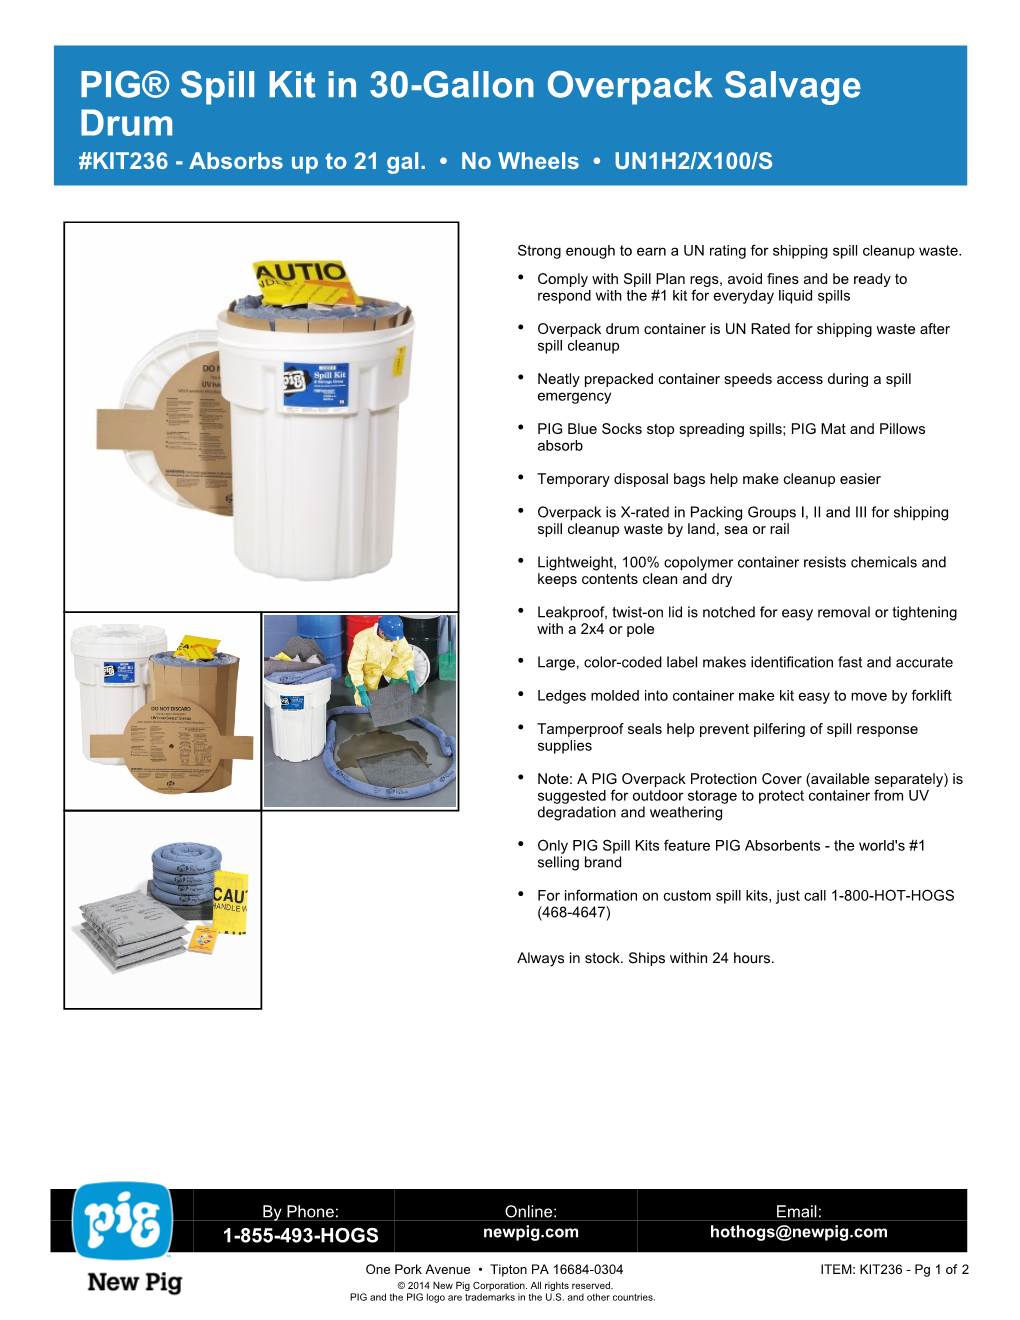 PIG® Spill Kit in 30-Gallon Overpack Salvage Drum #KIT236 - Absorbs up to 21 Gal